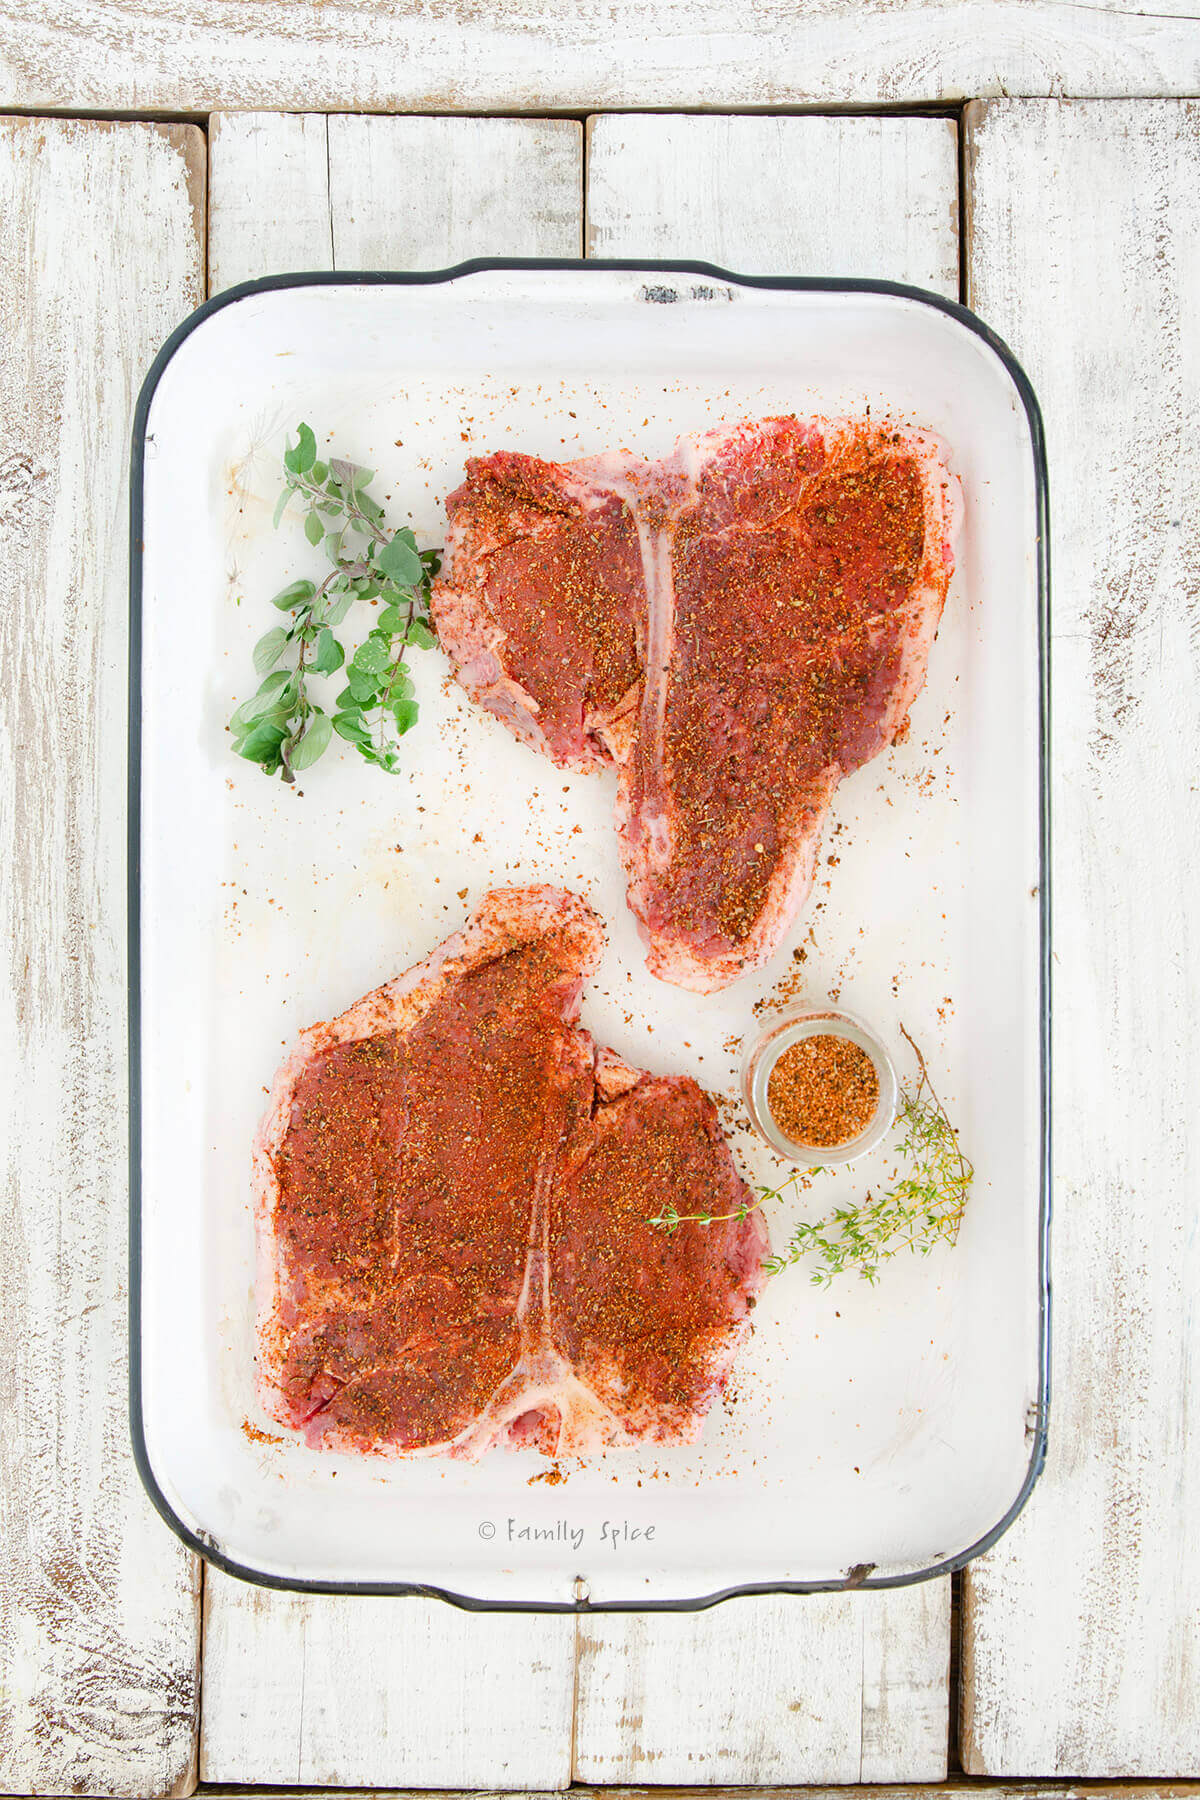 Top view of a white enamel pan with two seasoned raw porterhouse steaks and fresh herbs next to it